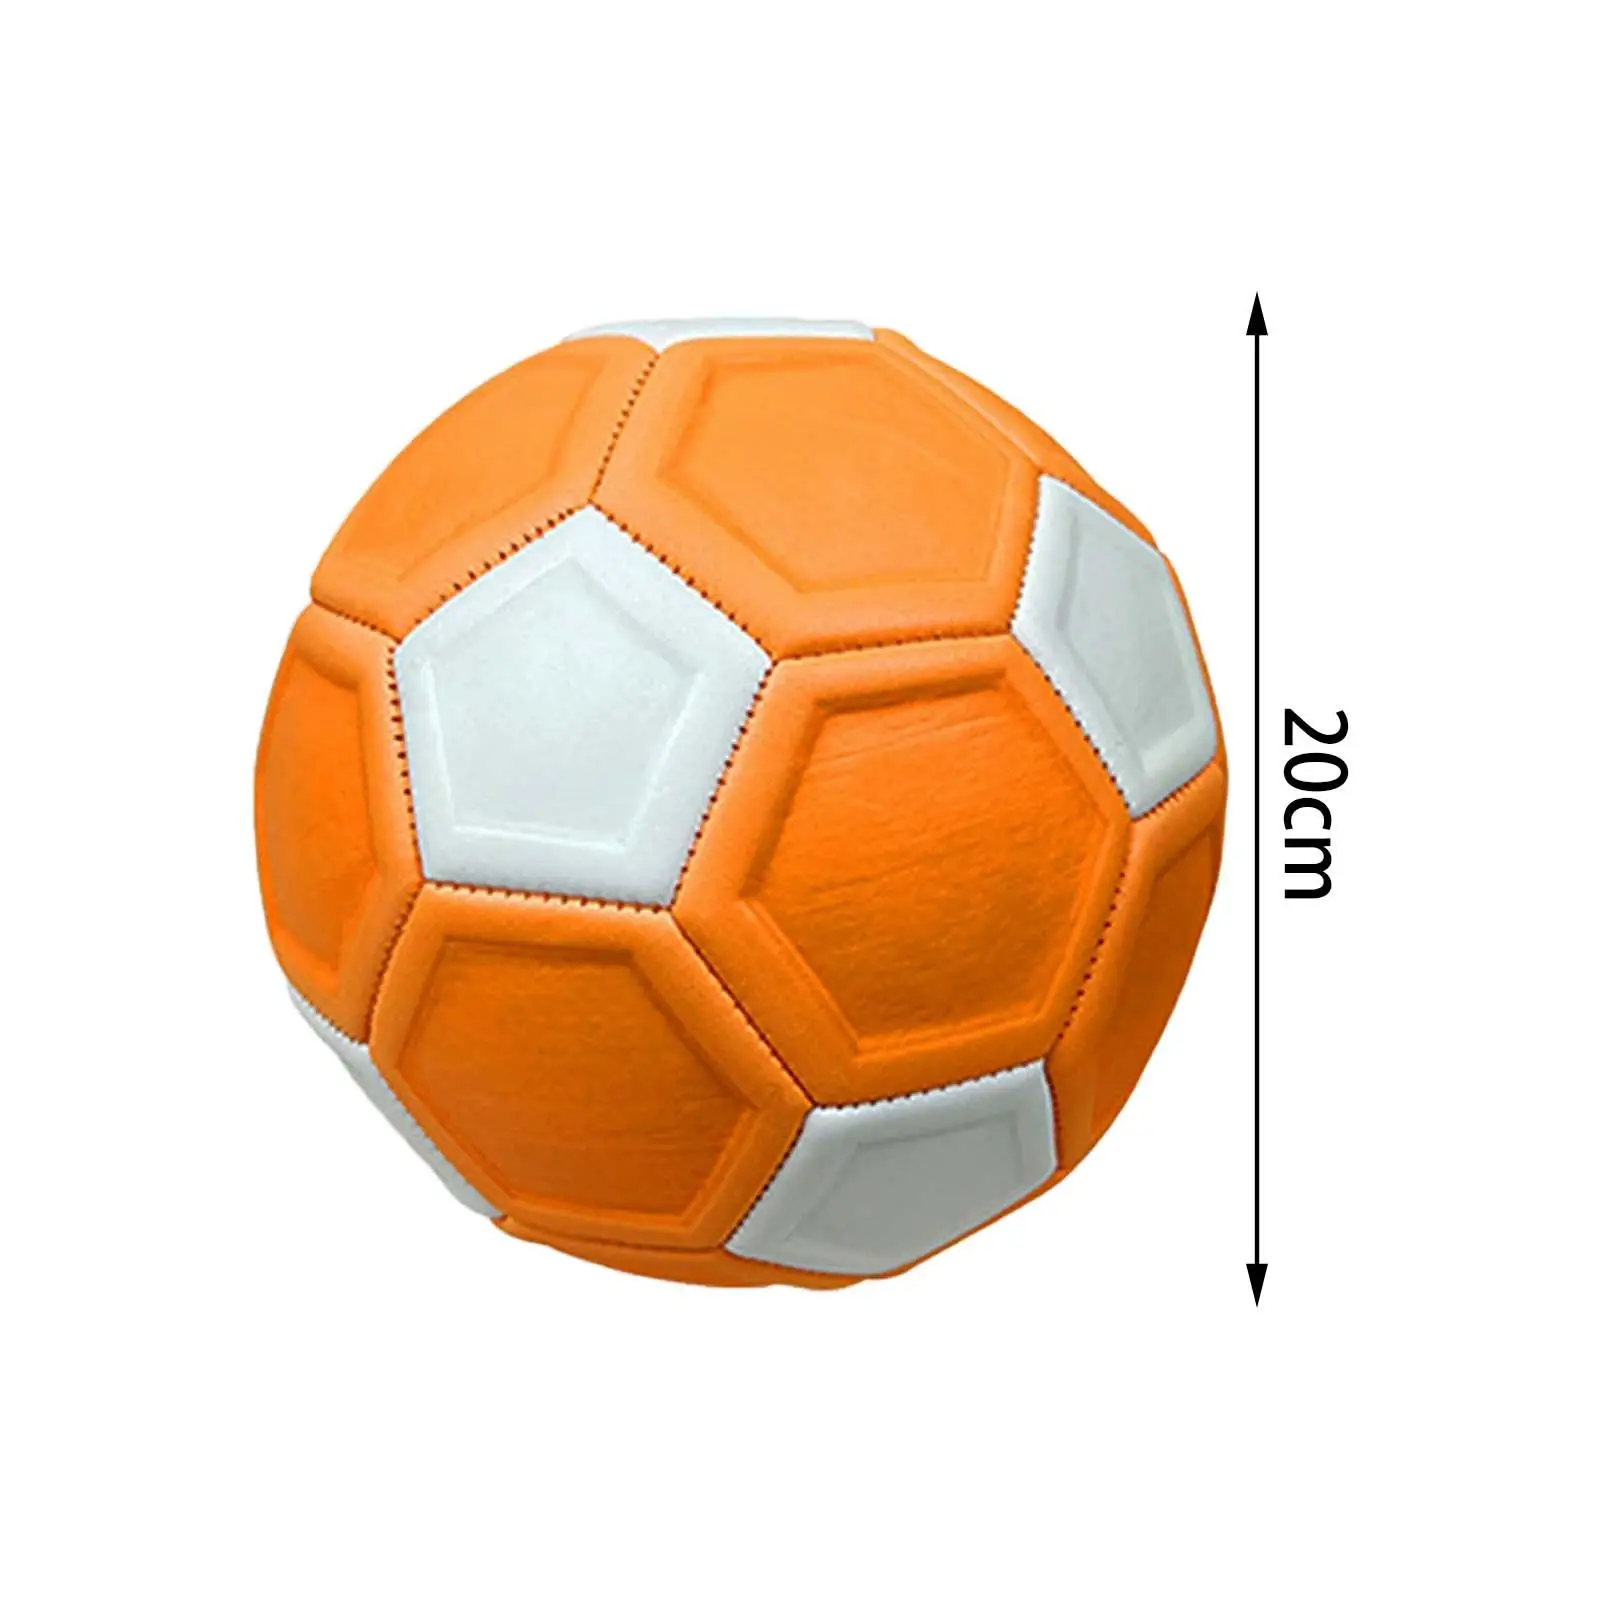 Soccer Ball Premium Durable Futsal Soccer Practice Official Match Ball Football Training Ball for Children Adults Competition